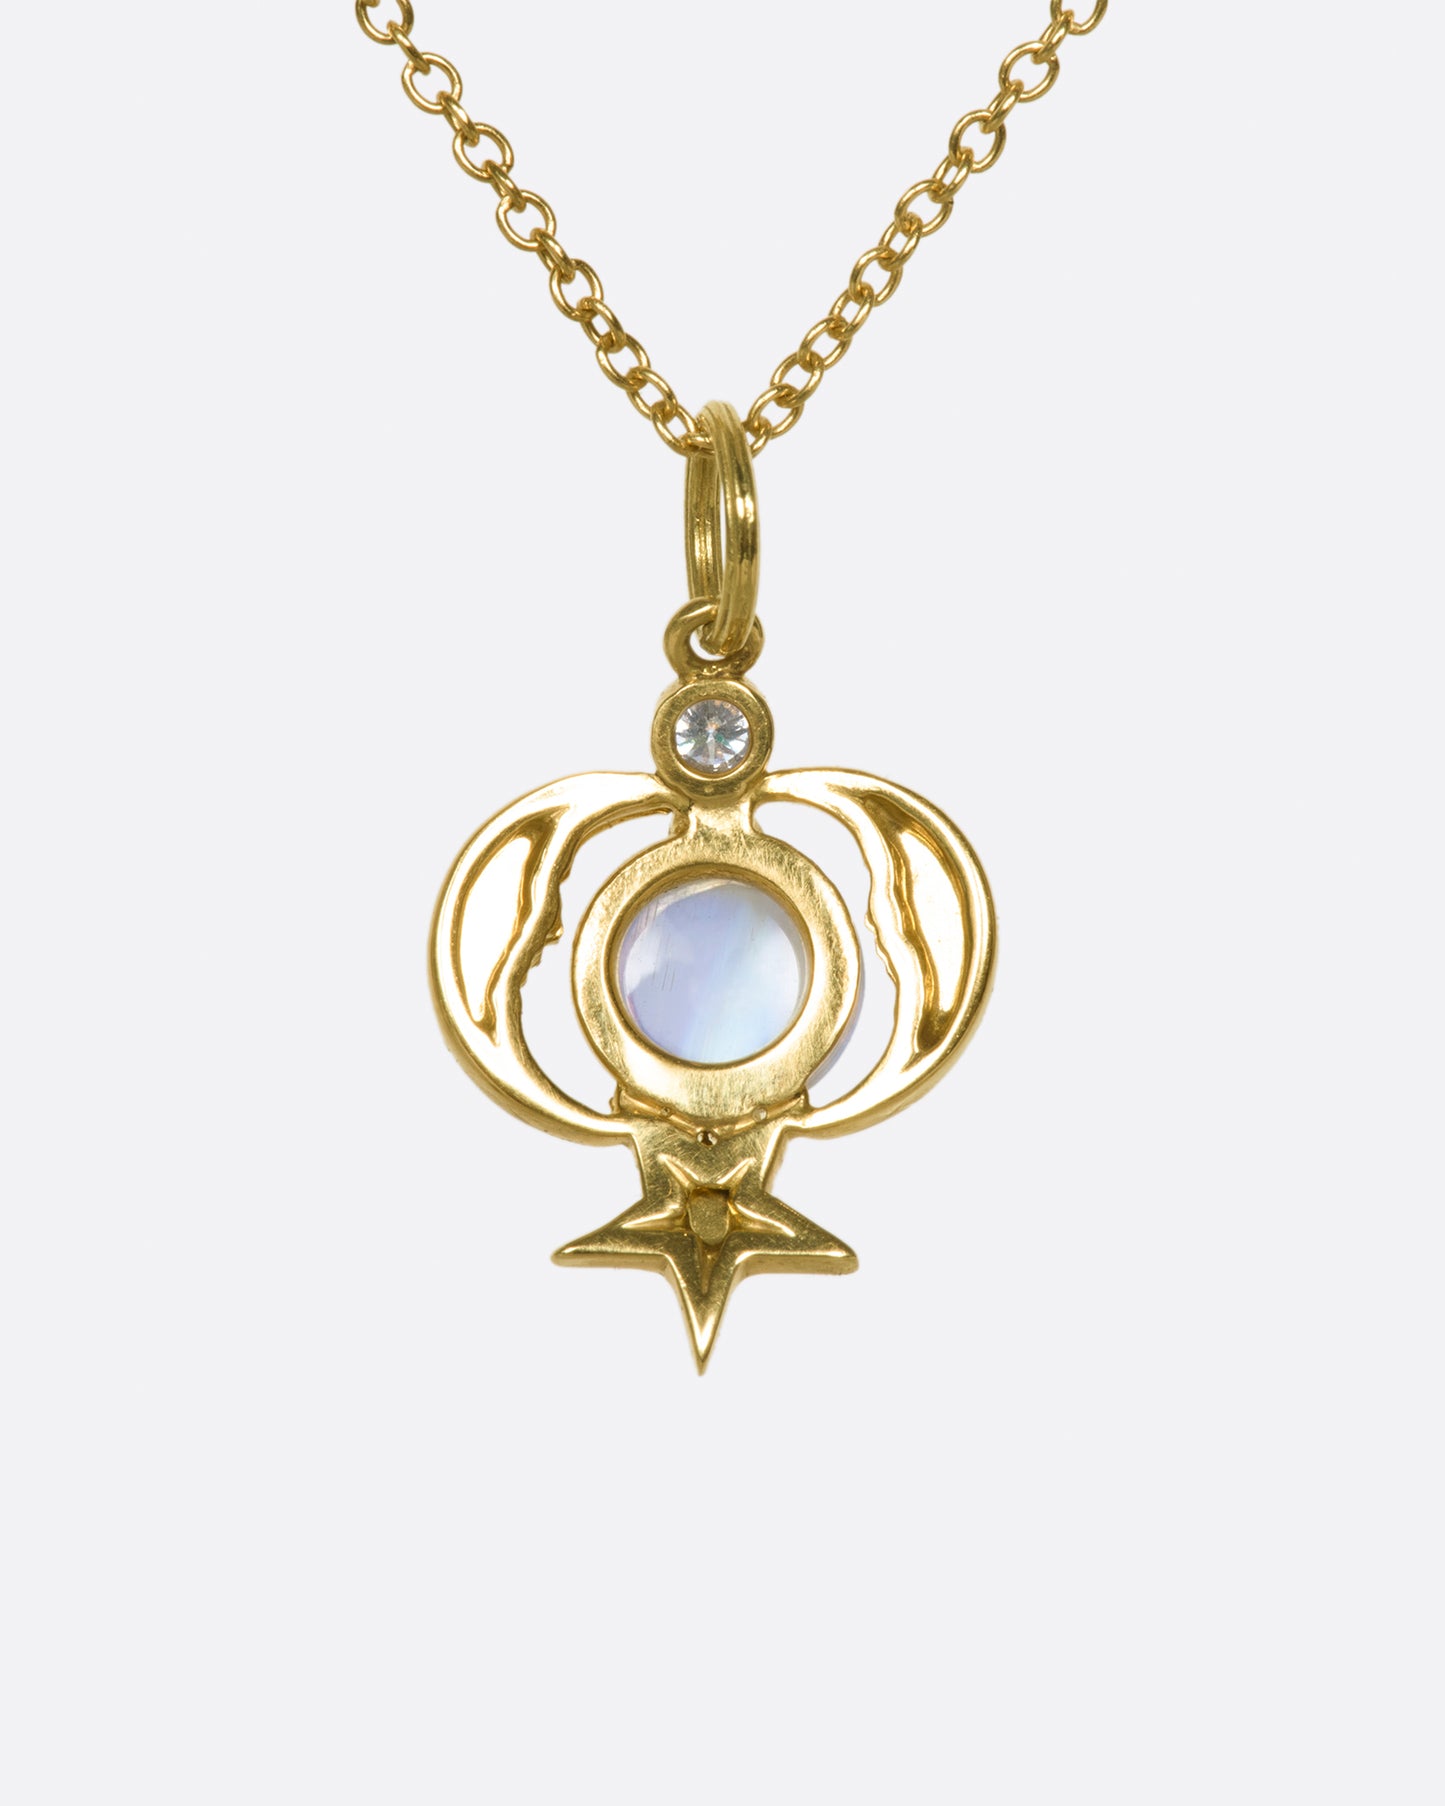 Part of Anthony Lent's beloved Celestial collection, this time with a rainbow moonstone.